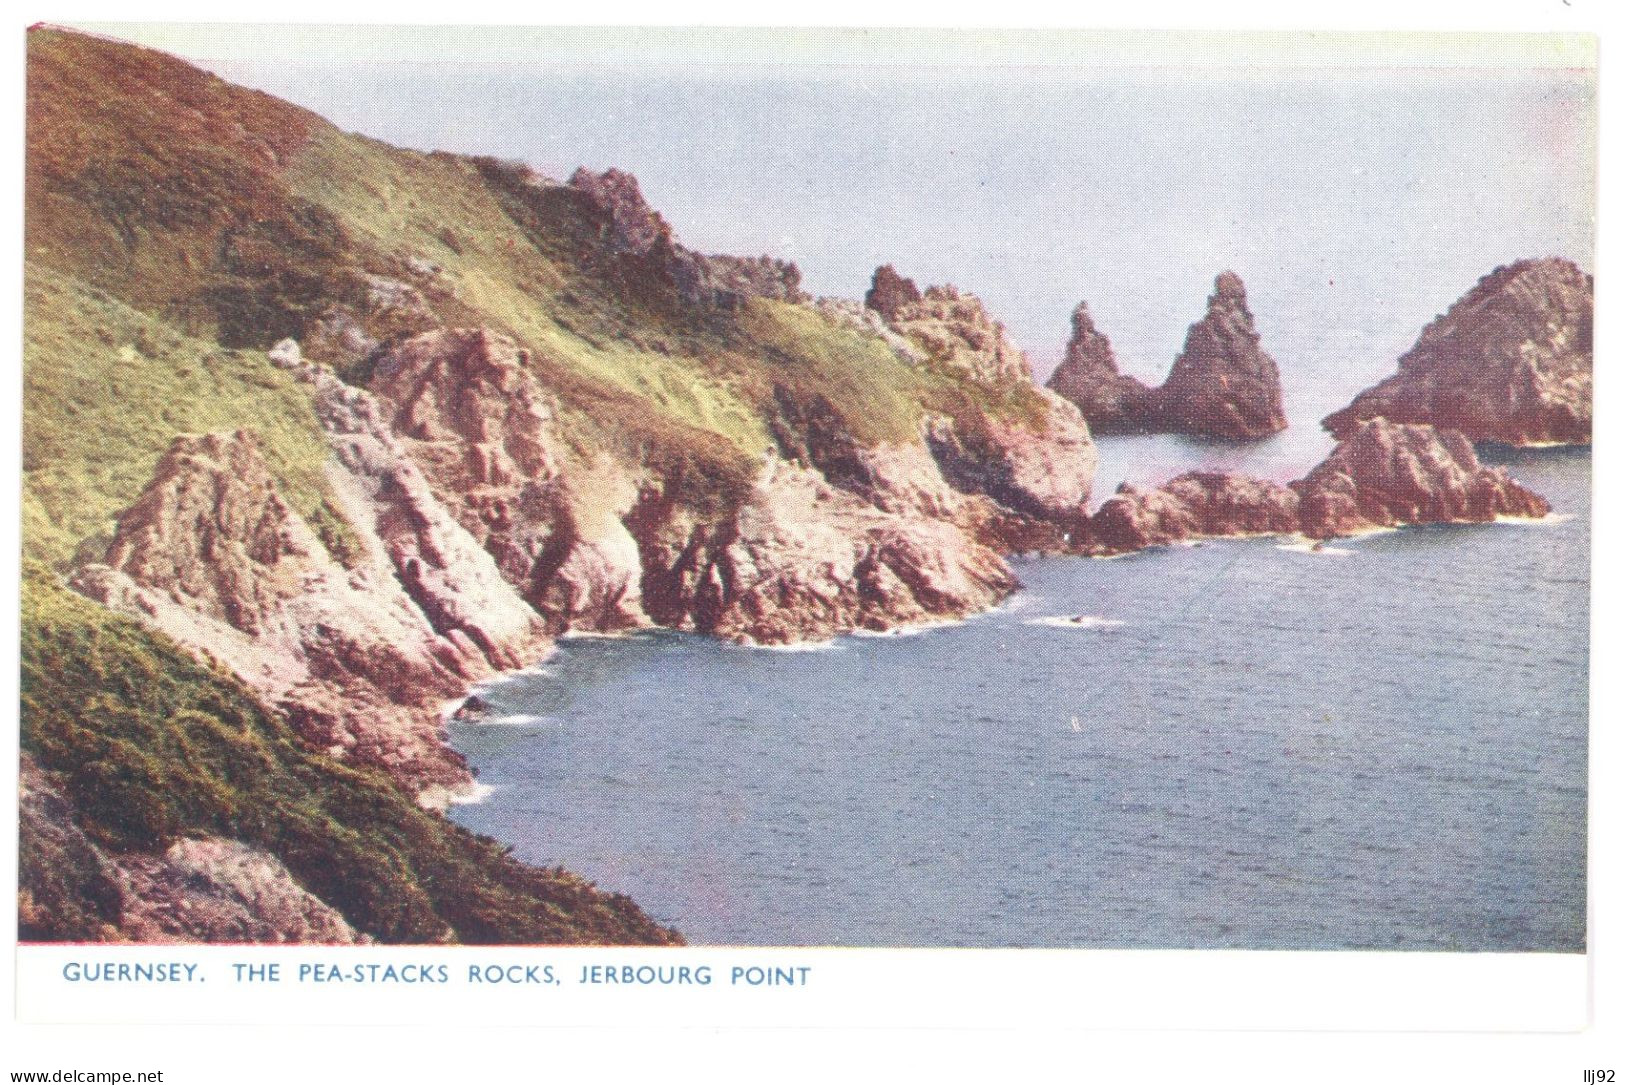 Royaume-Uni - GUERNSEY - The Pea-Stacks Rocks, JERBOURG POINT - Guernsey